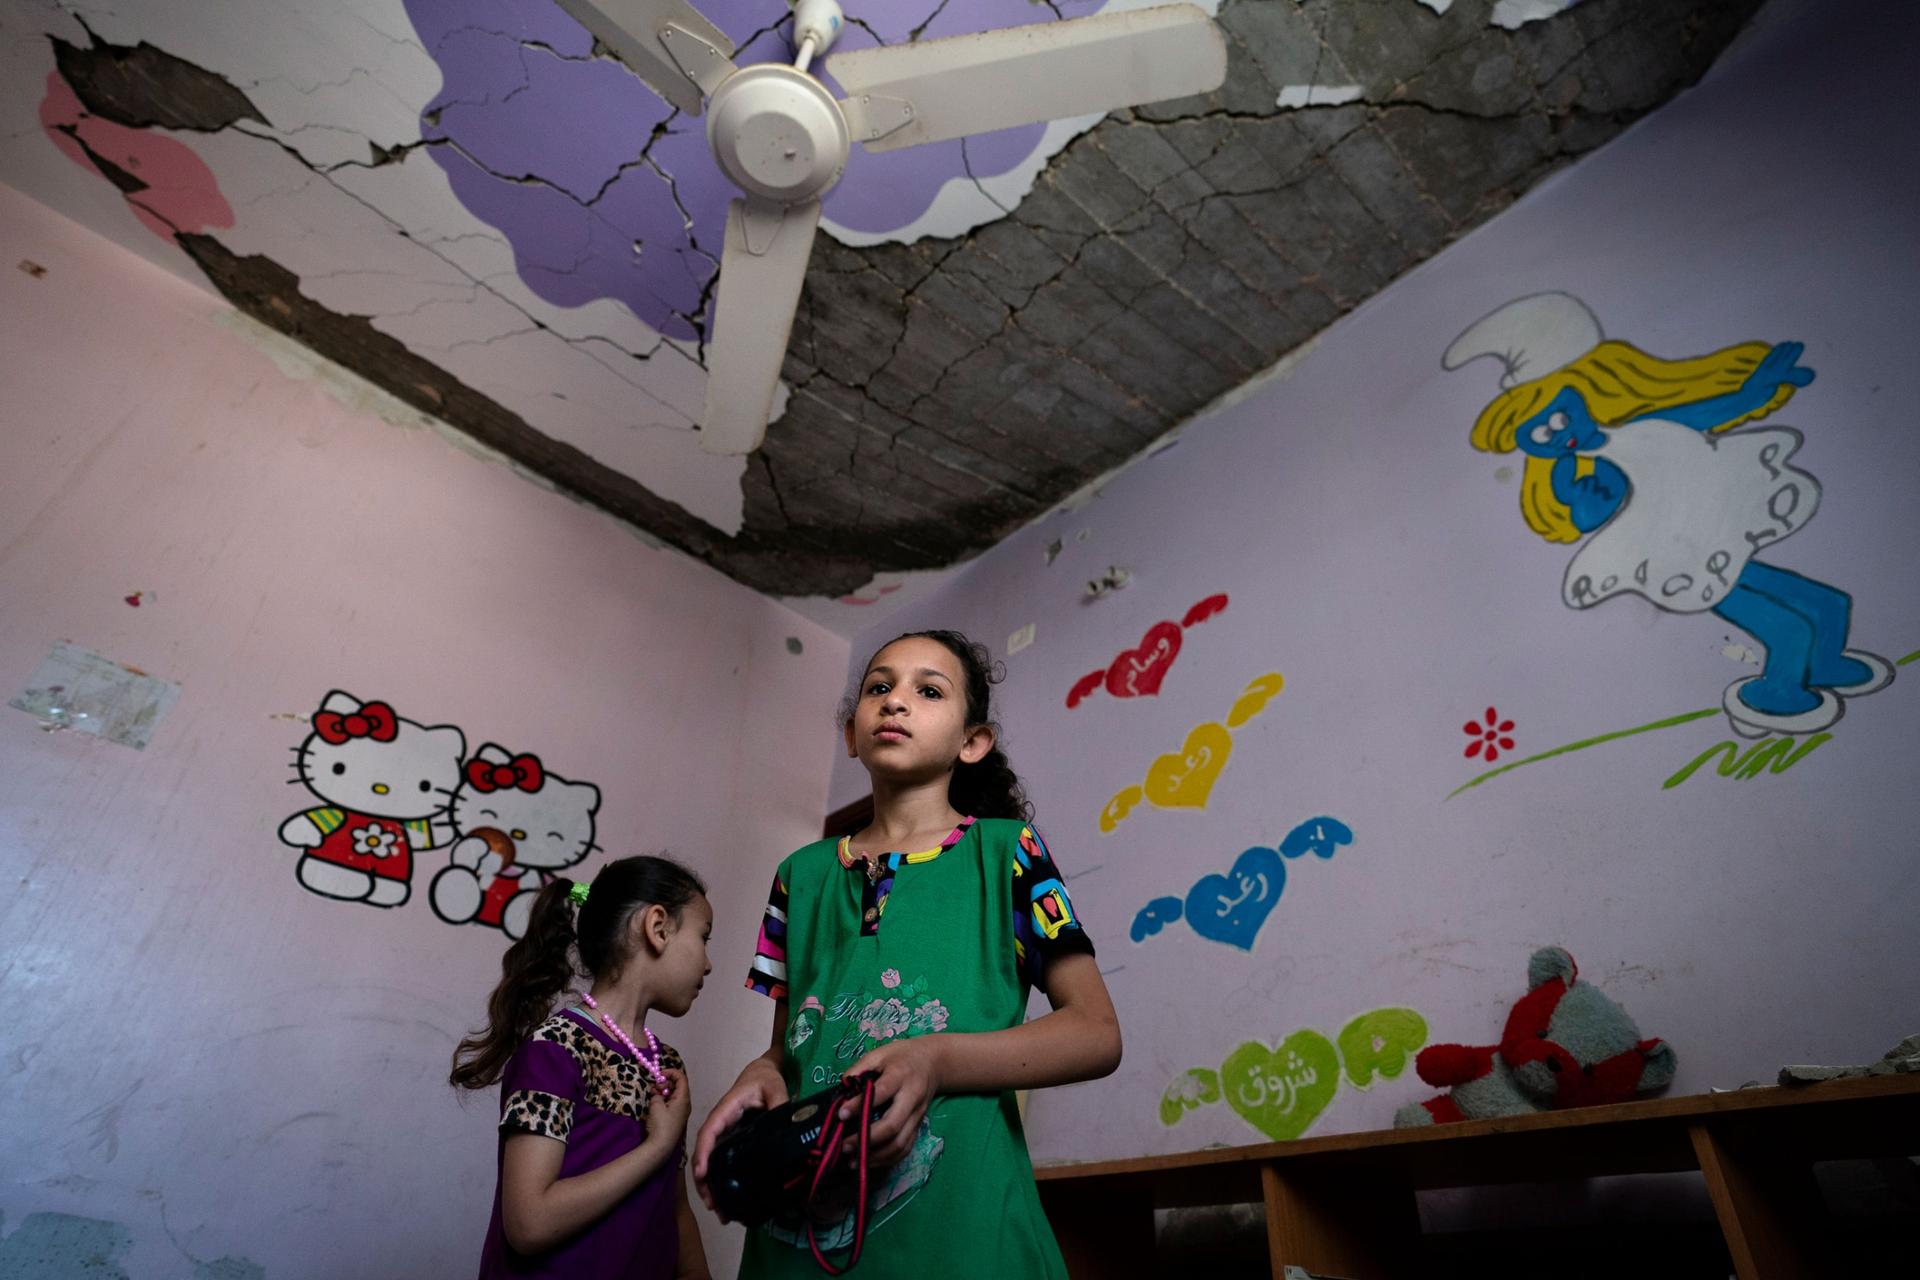 Two young girls are shown in a room with a smurf cartoon on the wall and a damaged ceiling.